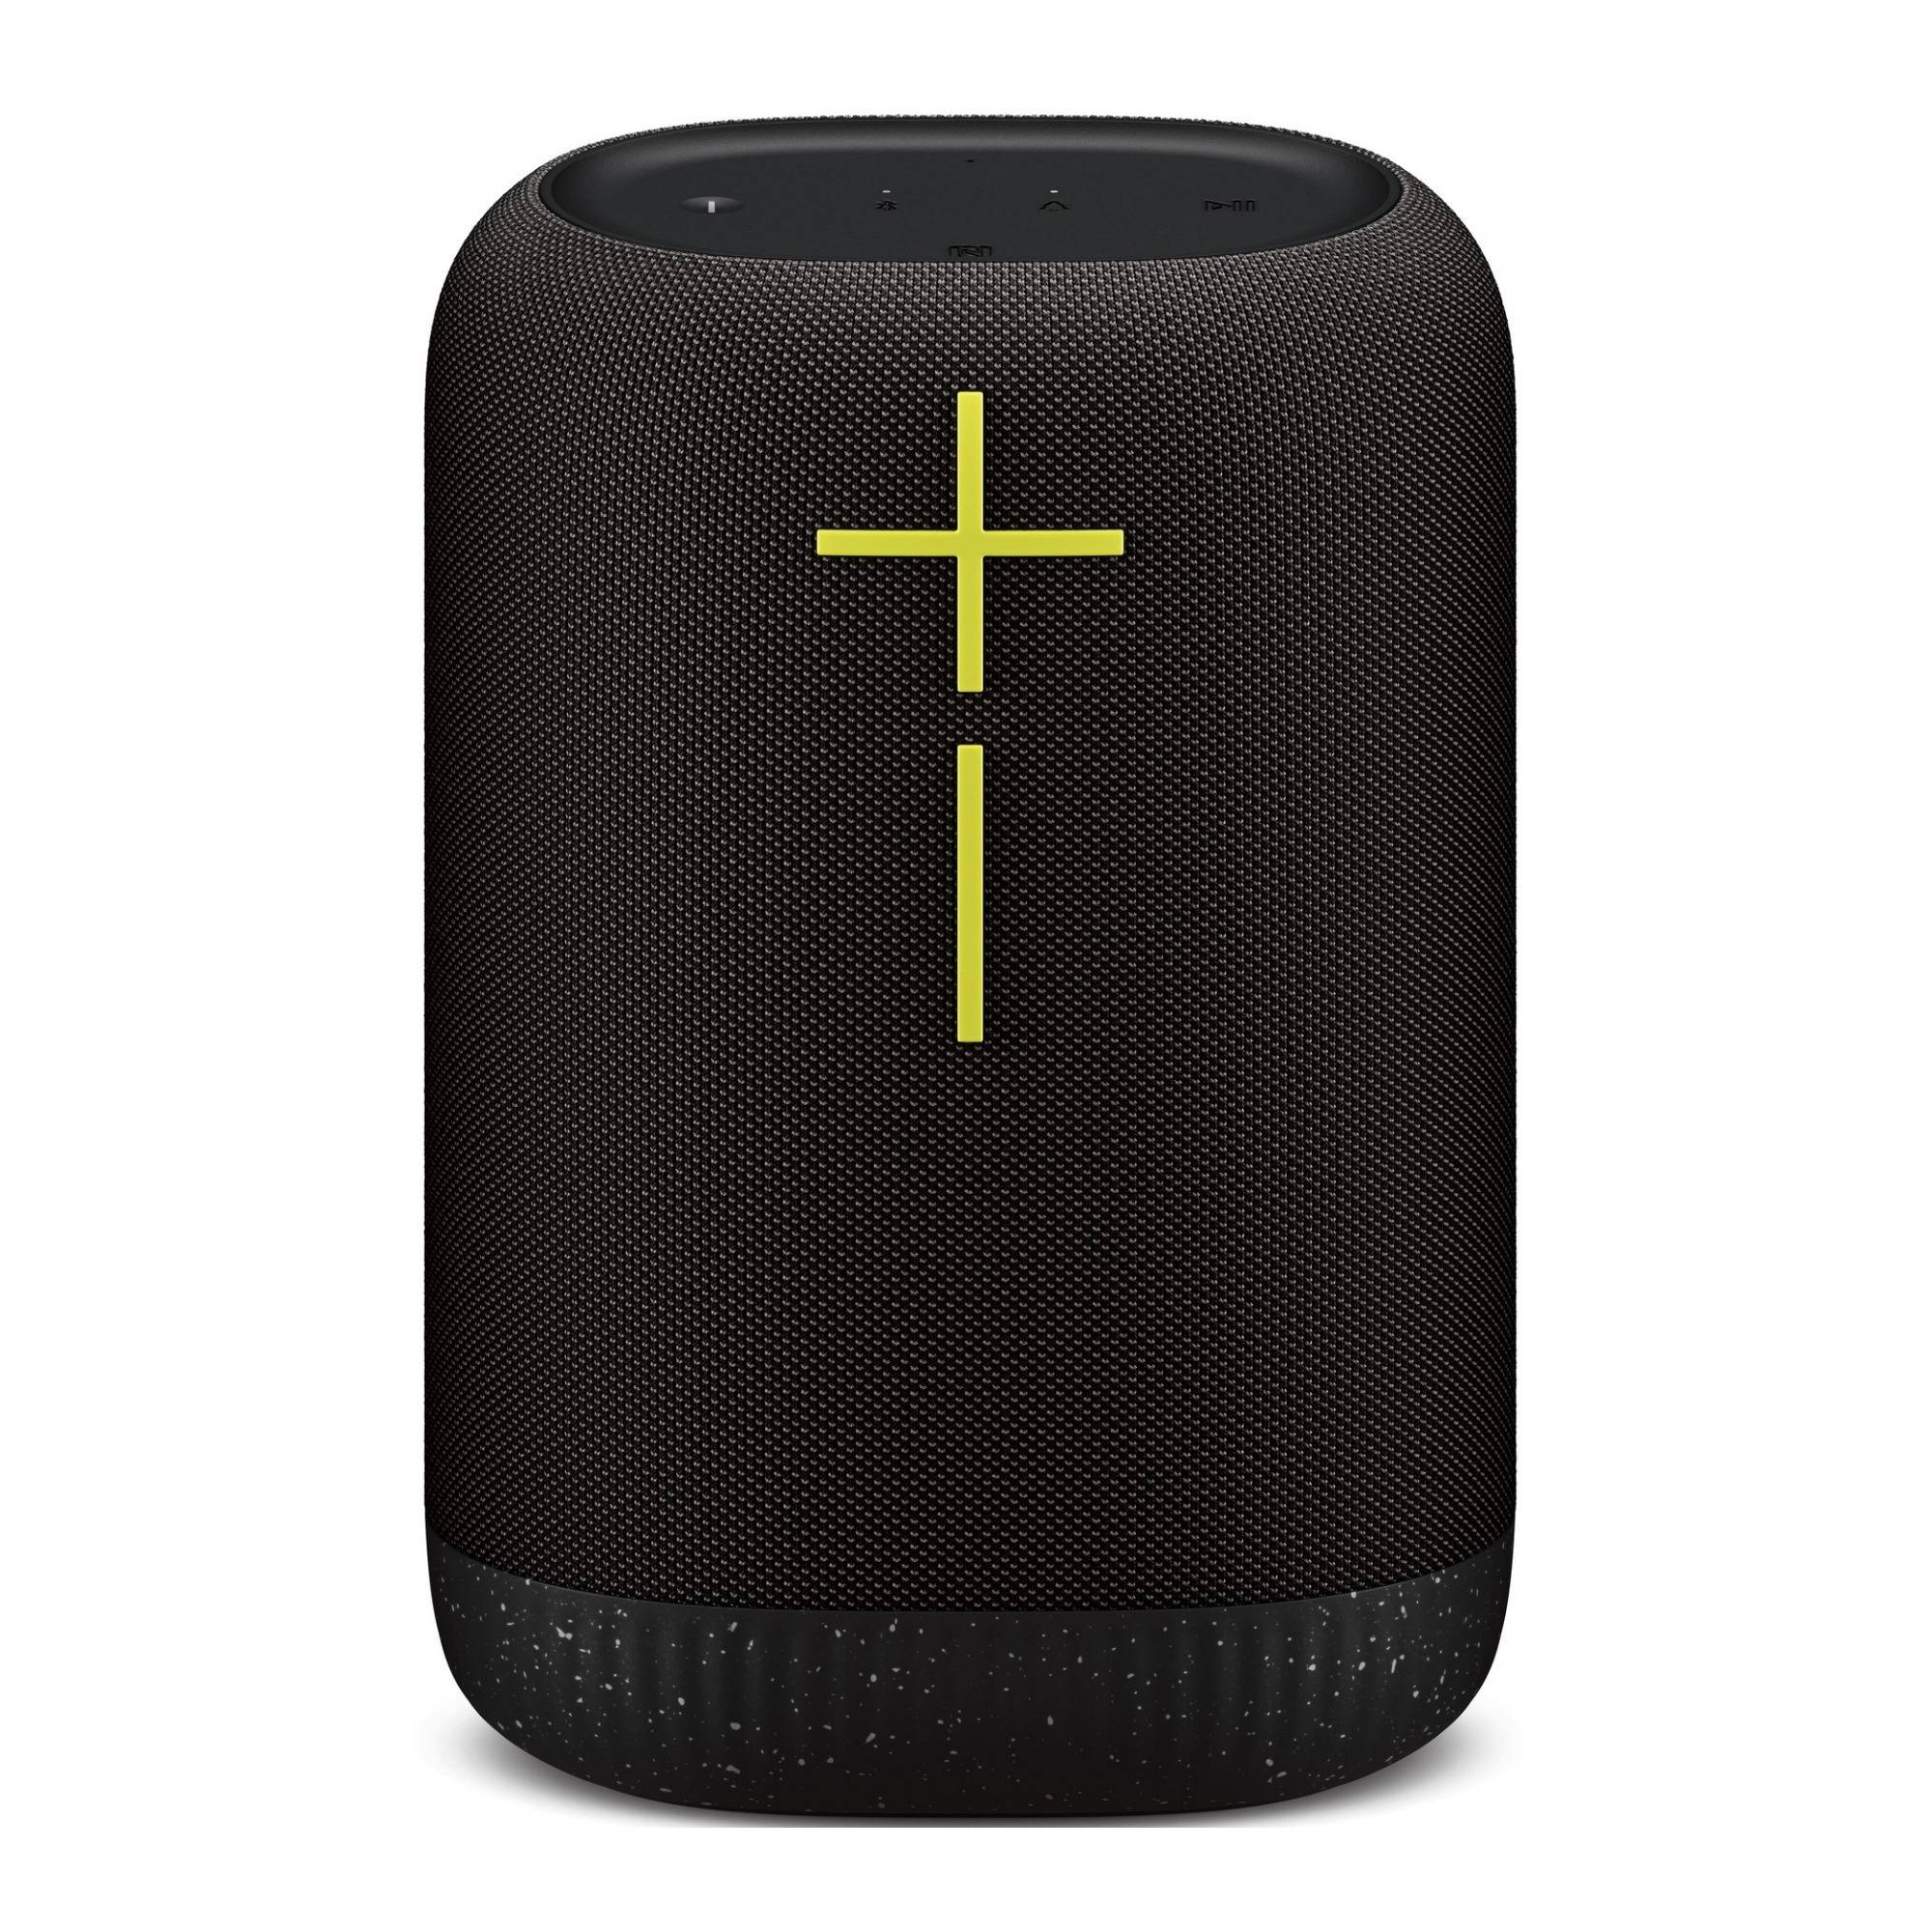 Ultimate Ears EpicBoom Portable Bluetooth Speaker with 360-Degree Bass and Adaptive EQ (Black)